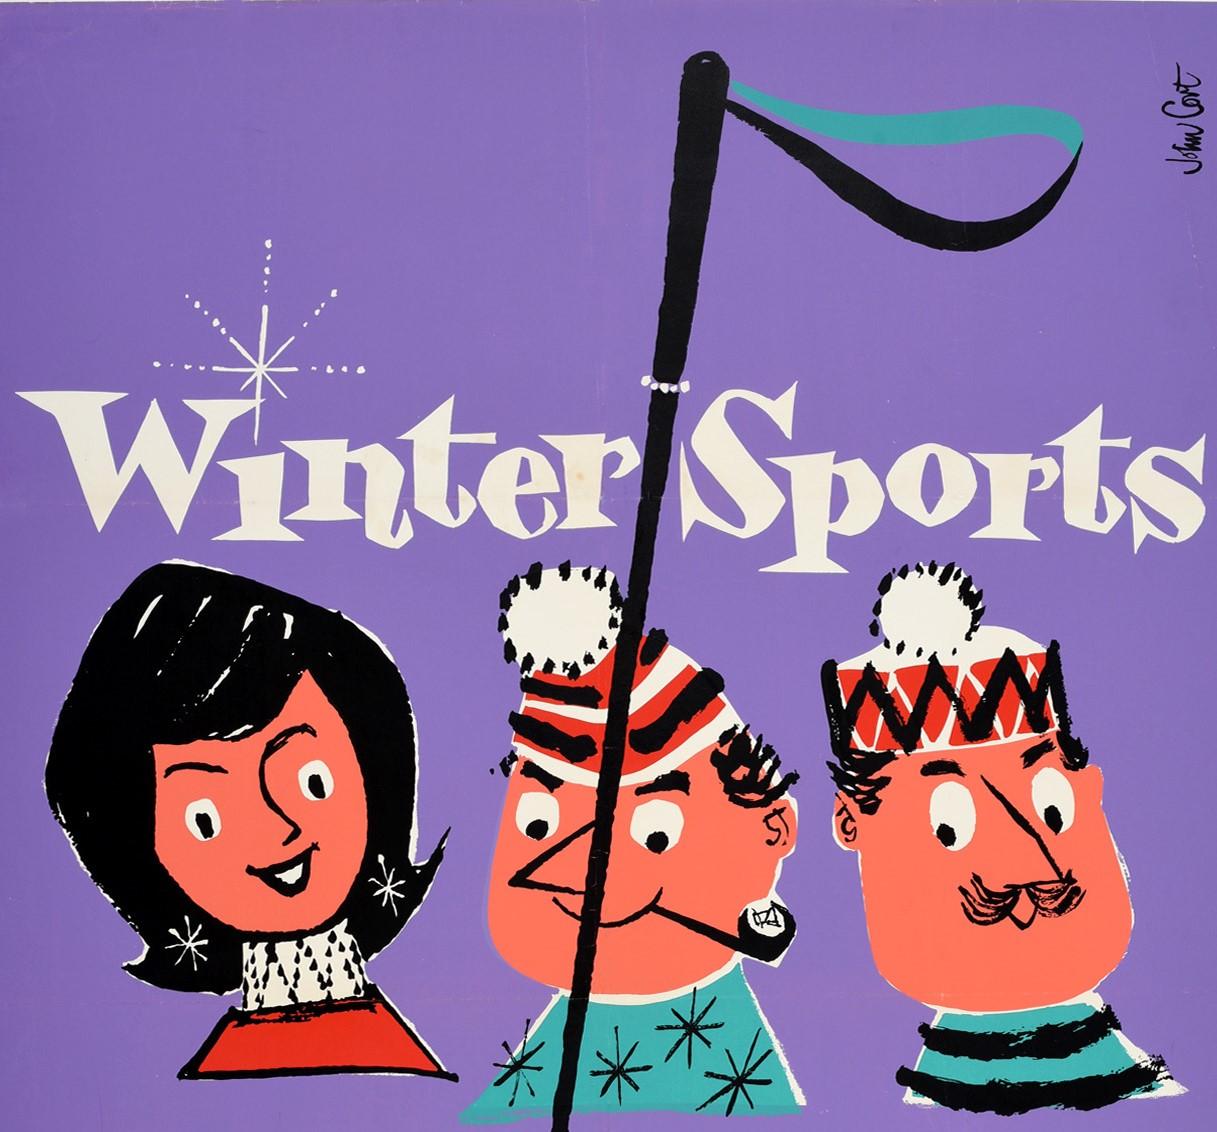 Original vintage skiing poster - Winter Sports Go by Train - featuring a fun and colourful cartoon illustration of a smiling lady in a red jumper, a man wearing a bobble hat and smoking a pipe and another man with a moustache below the stylised